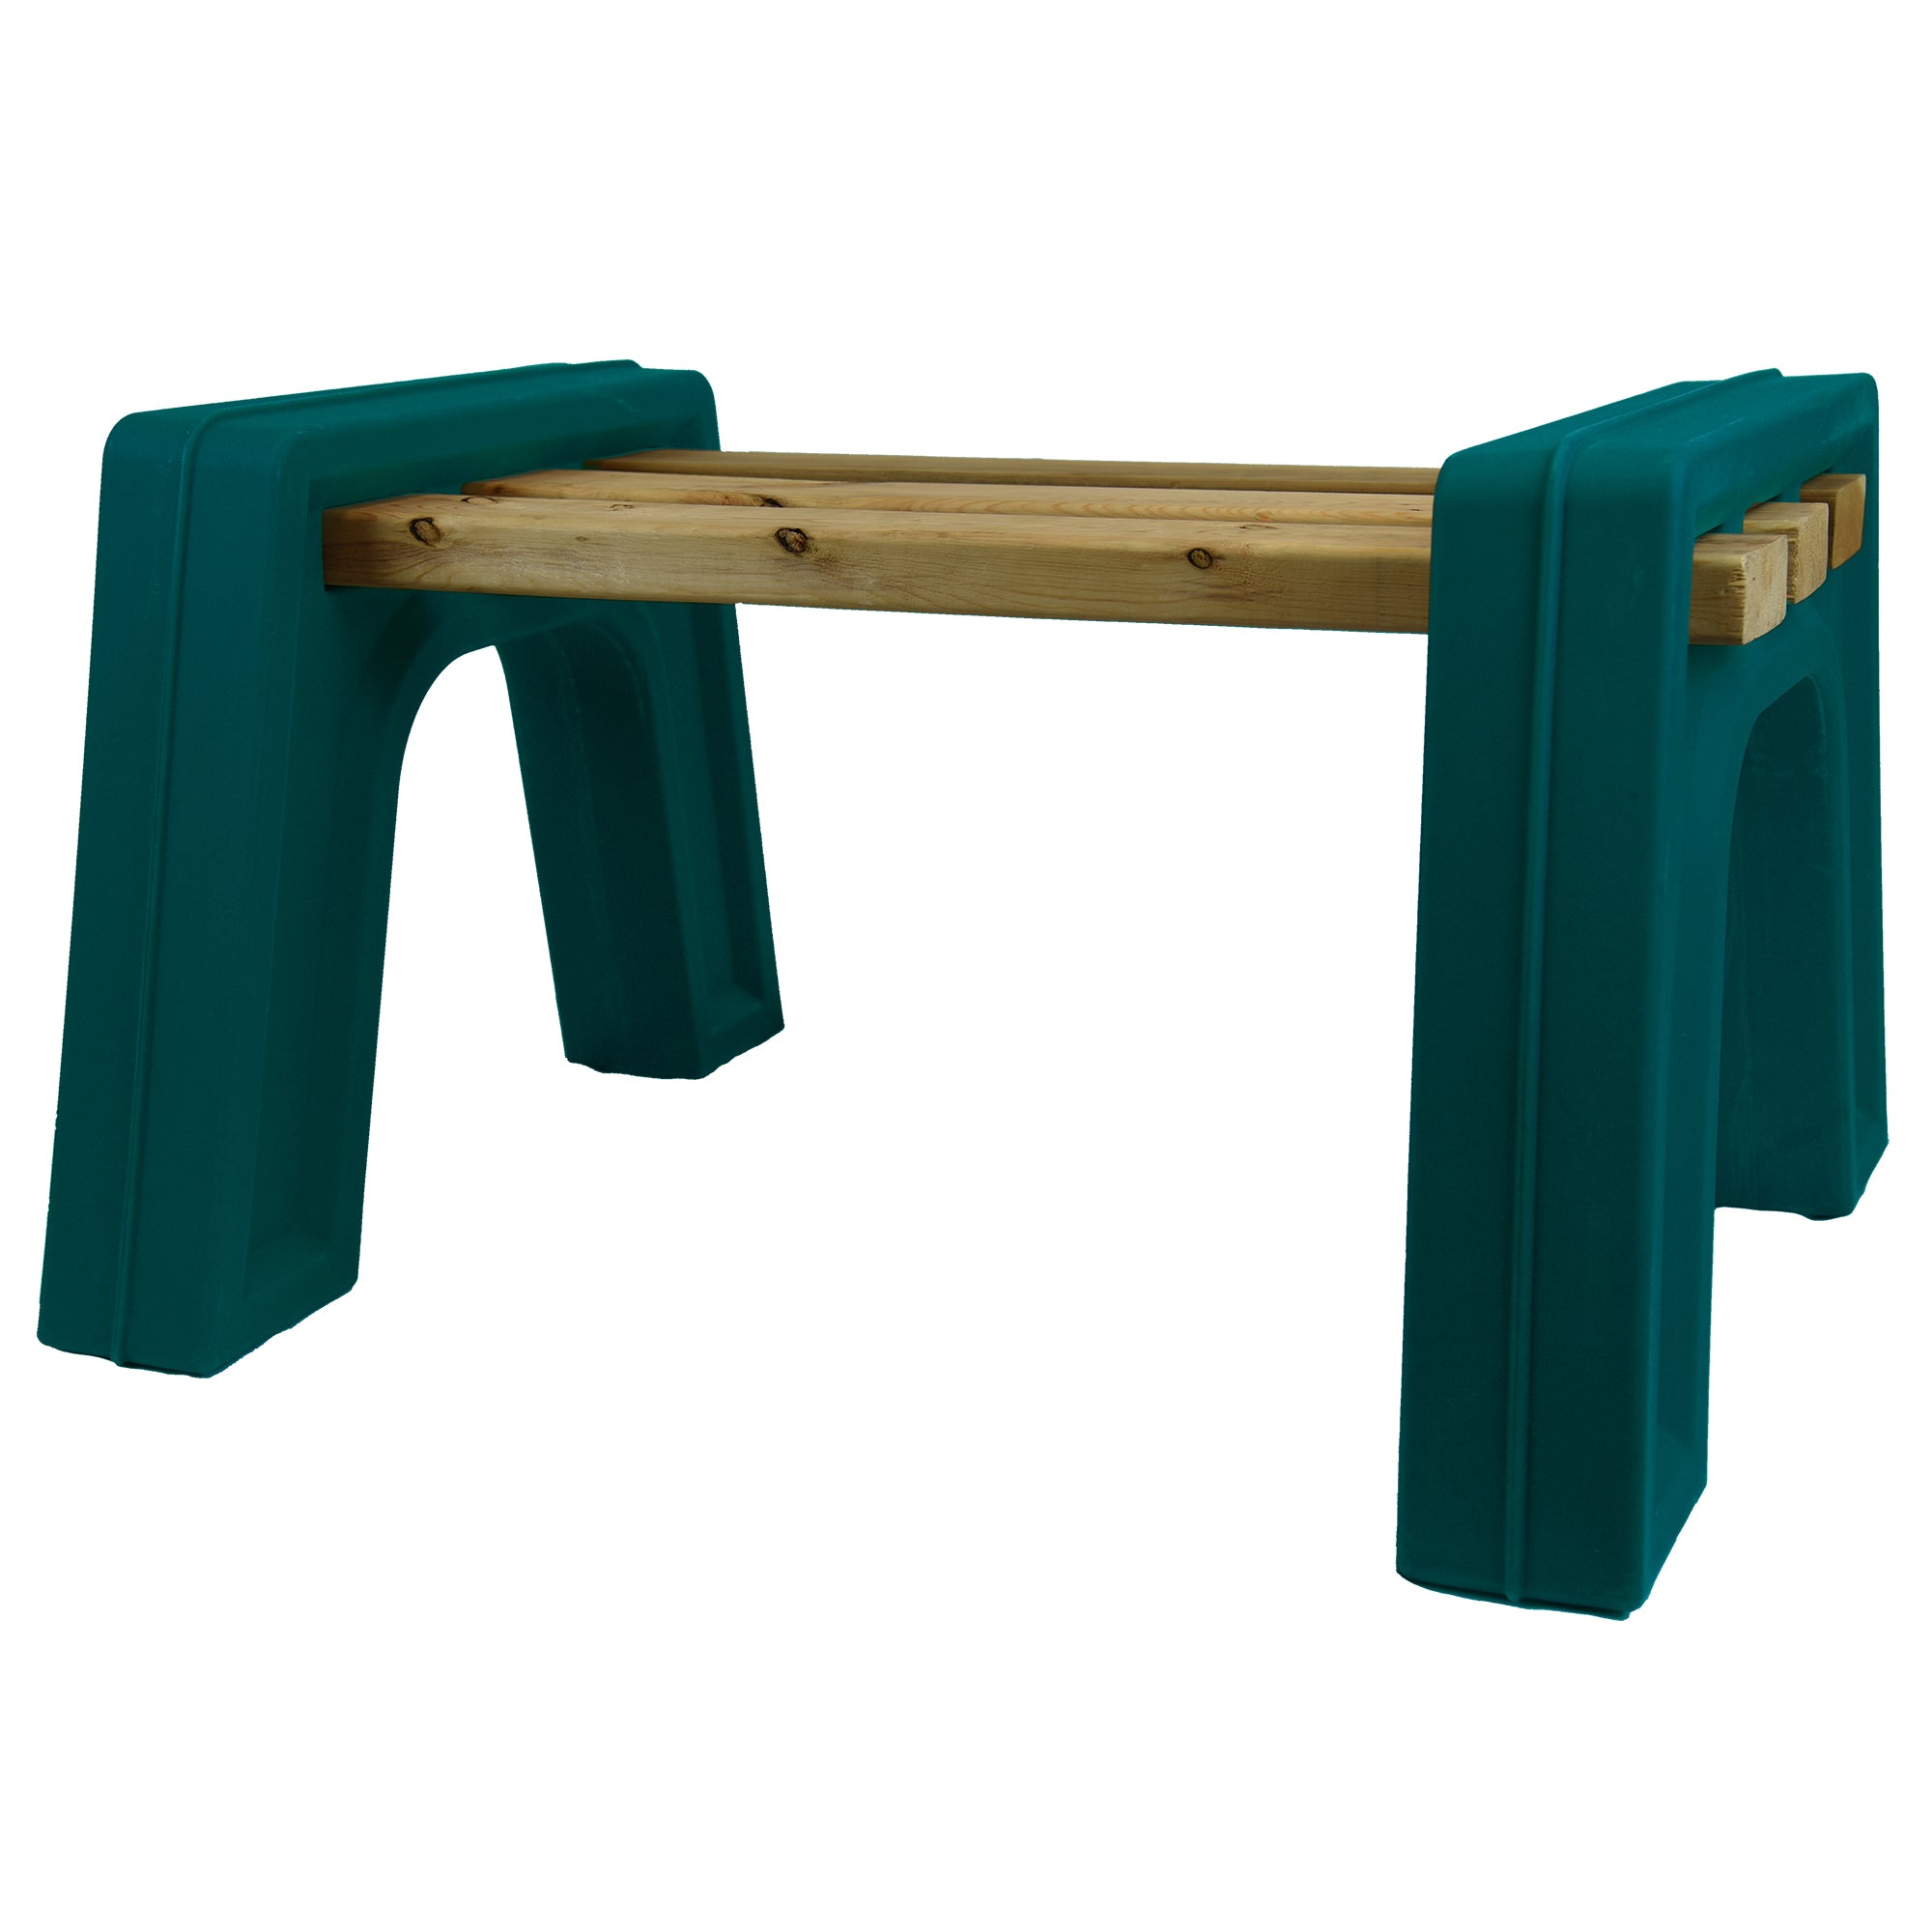 Green backless bench with wood on a white background